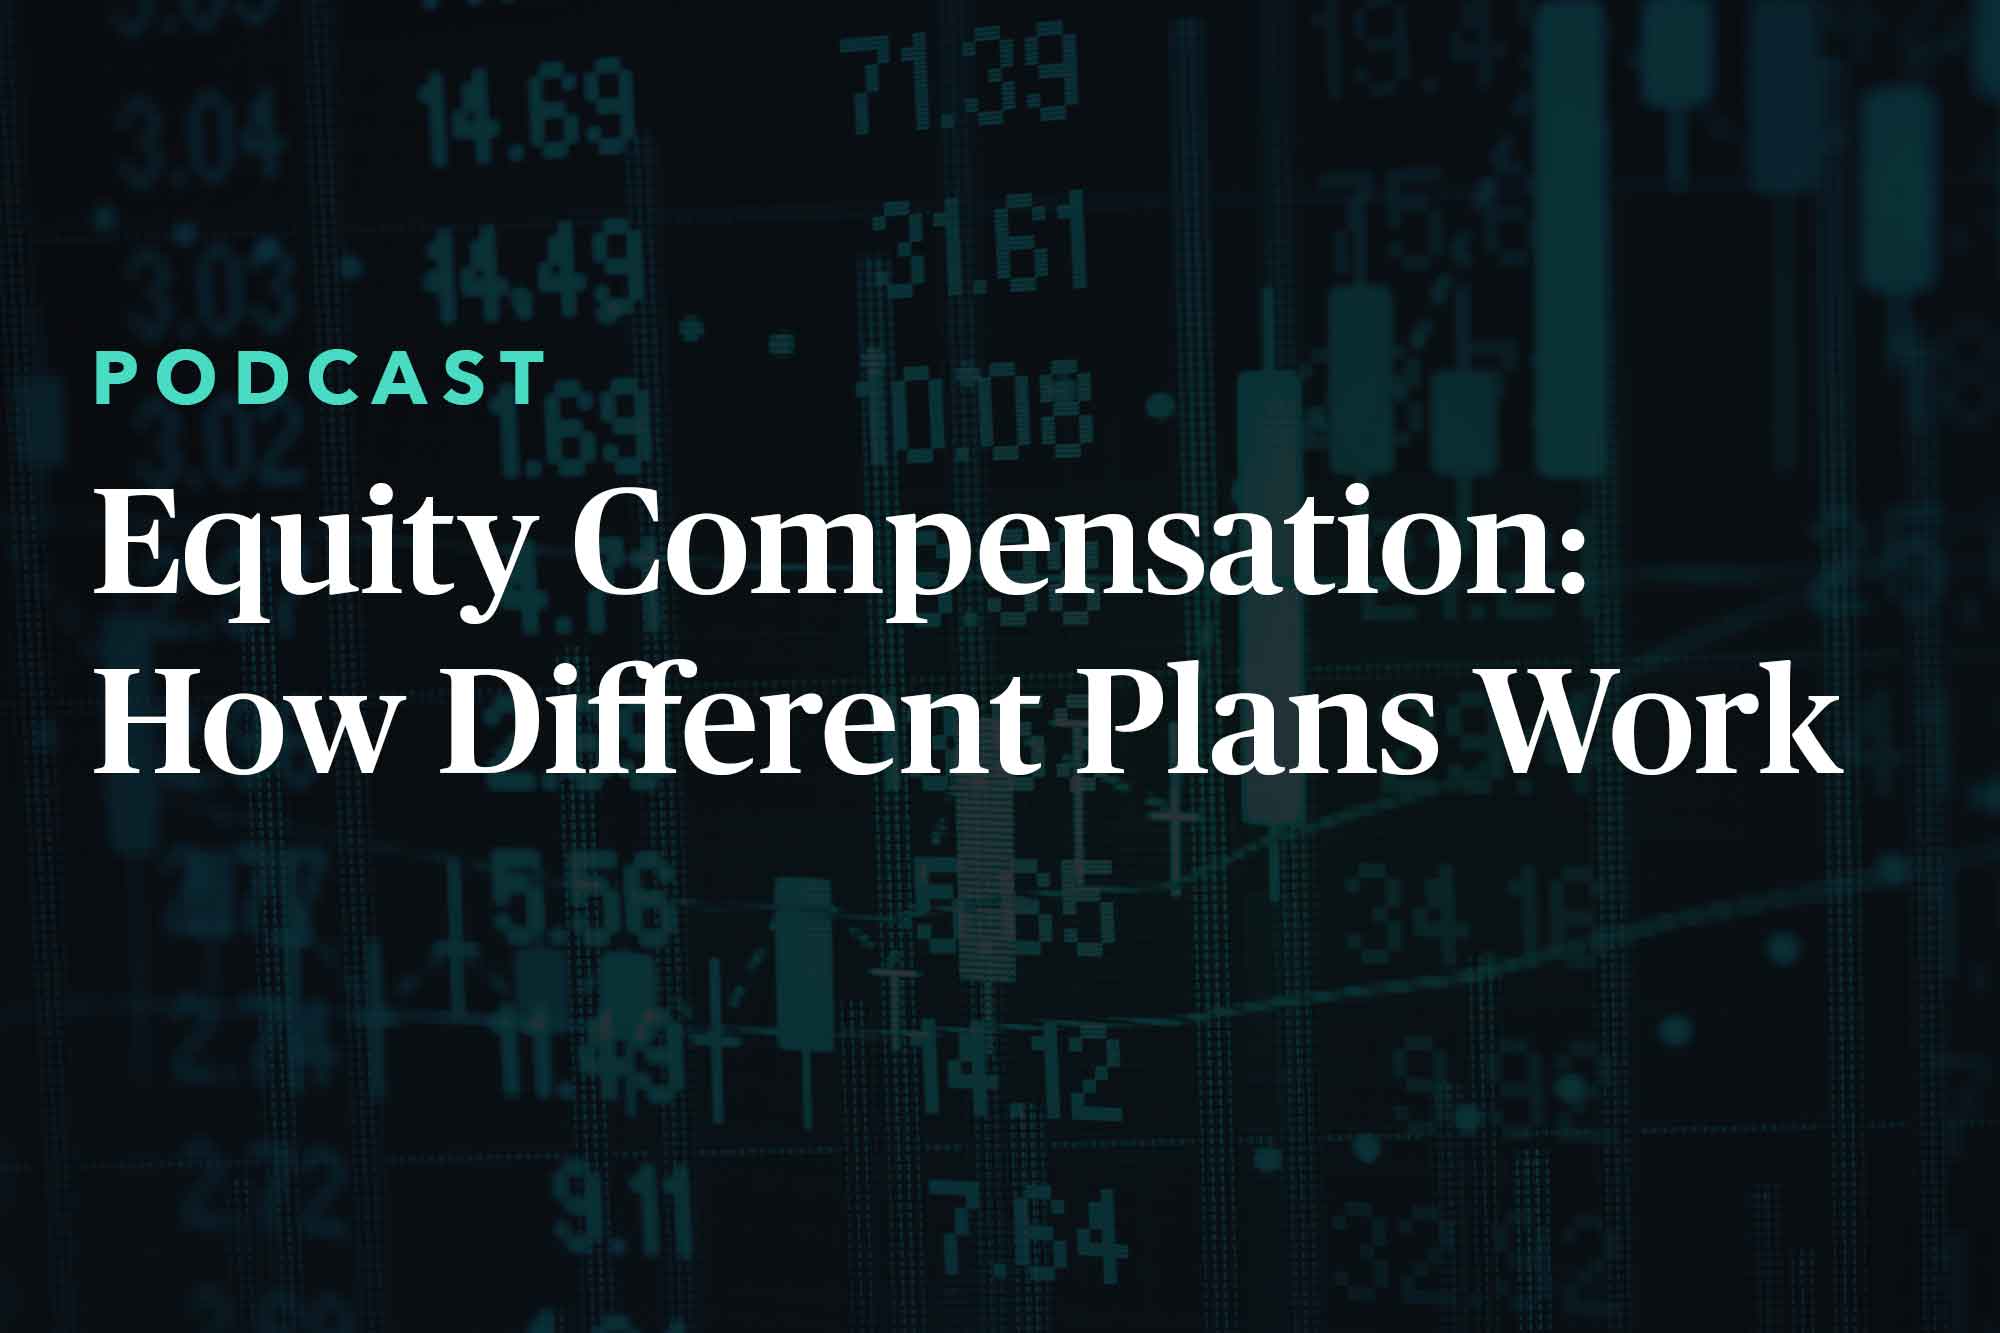 Part 2 Equity Compensation: How Different Plans Work